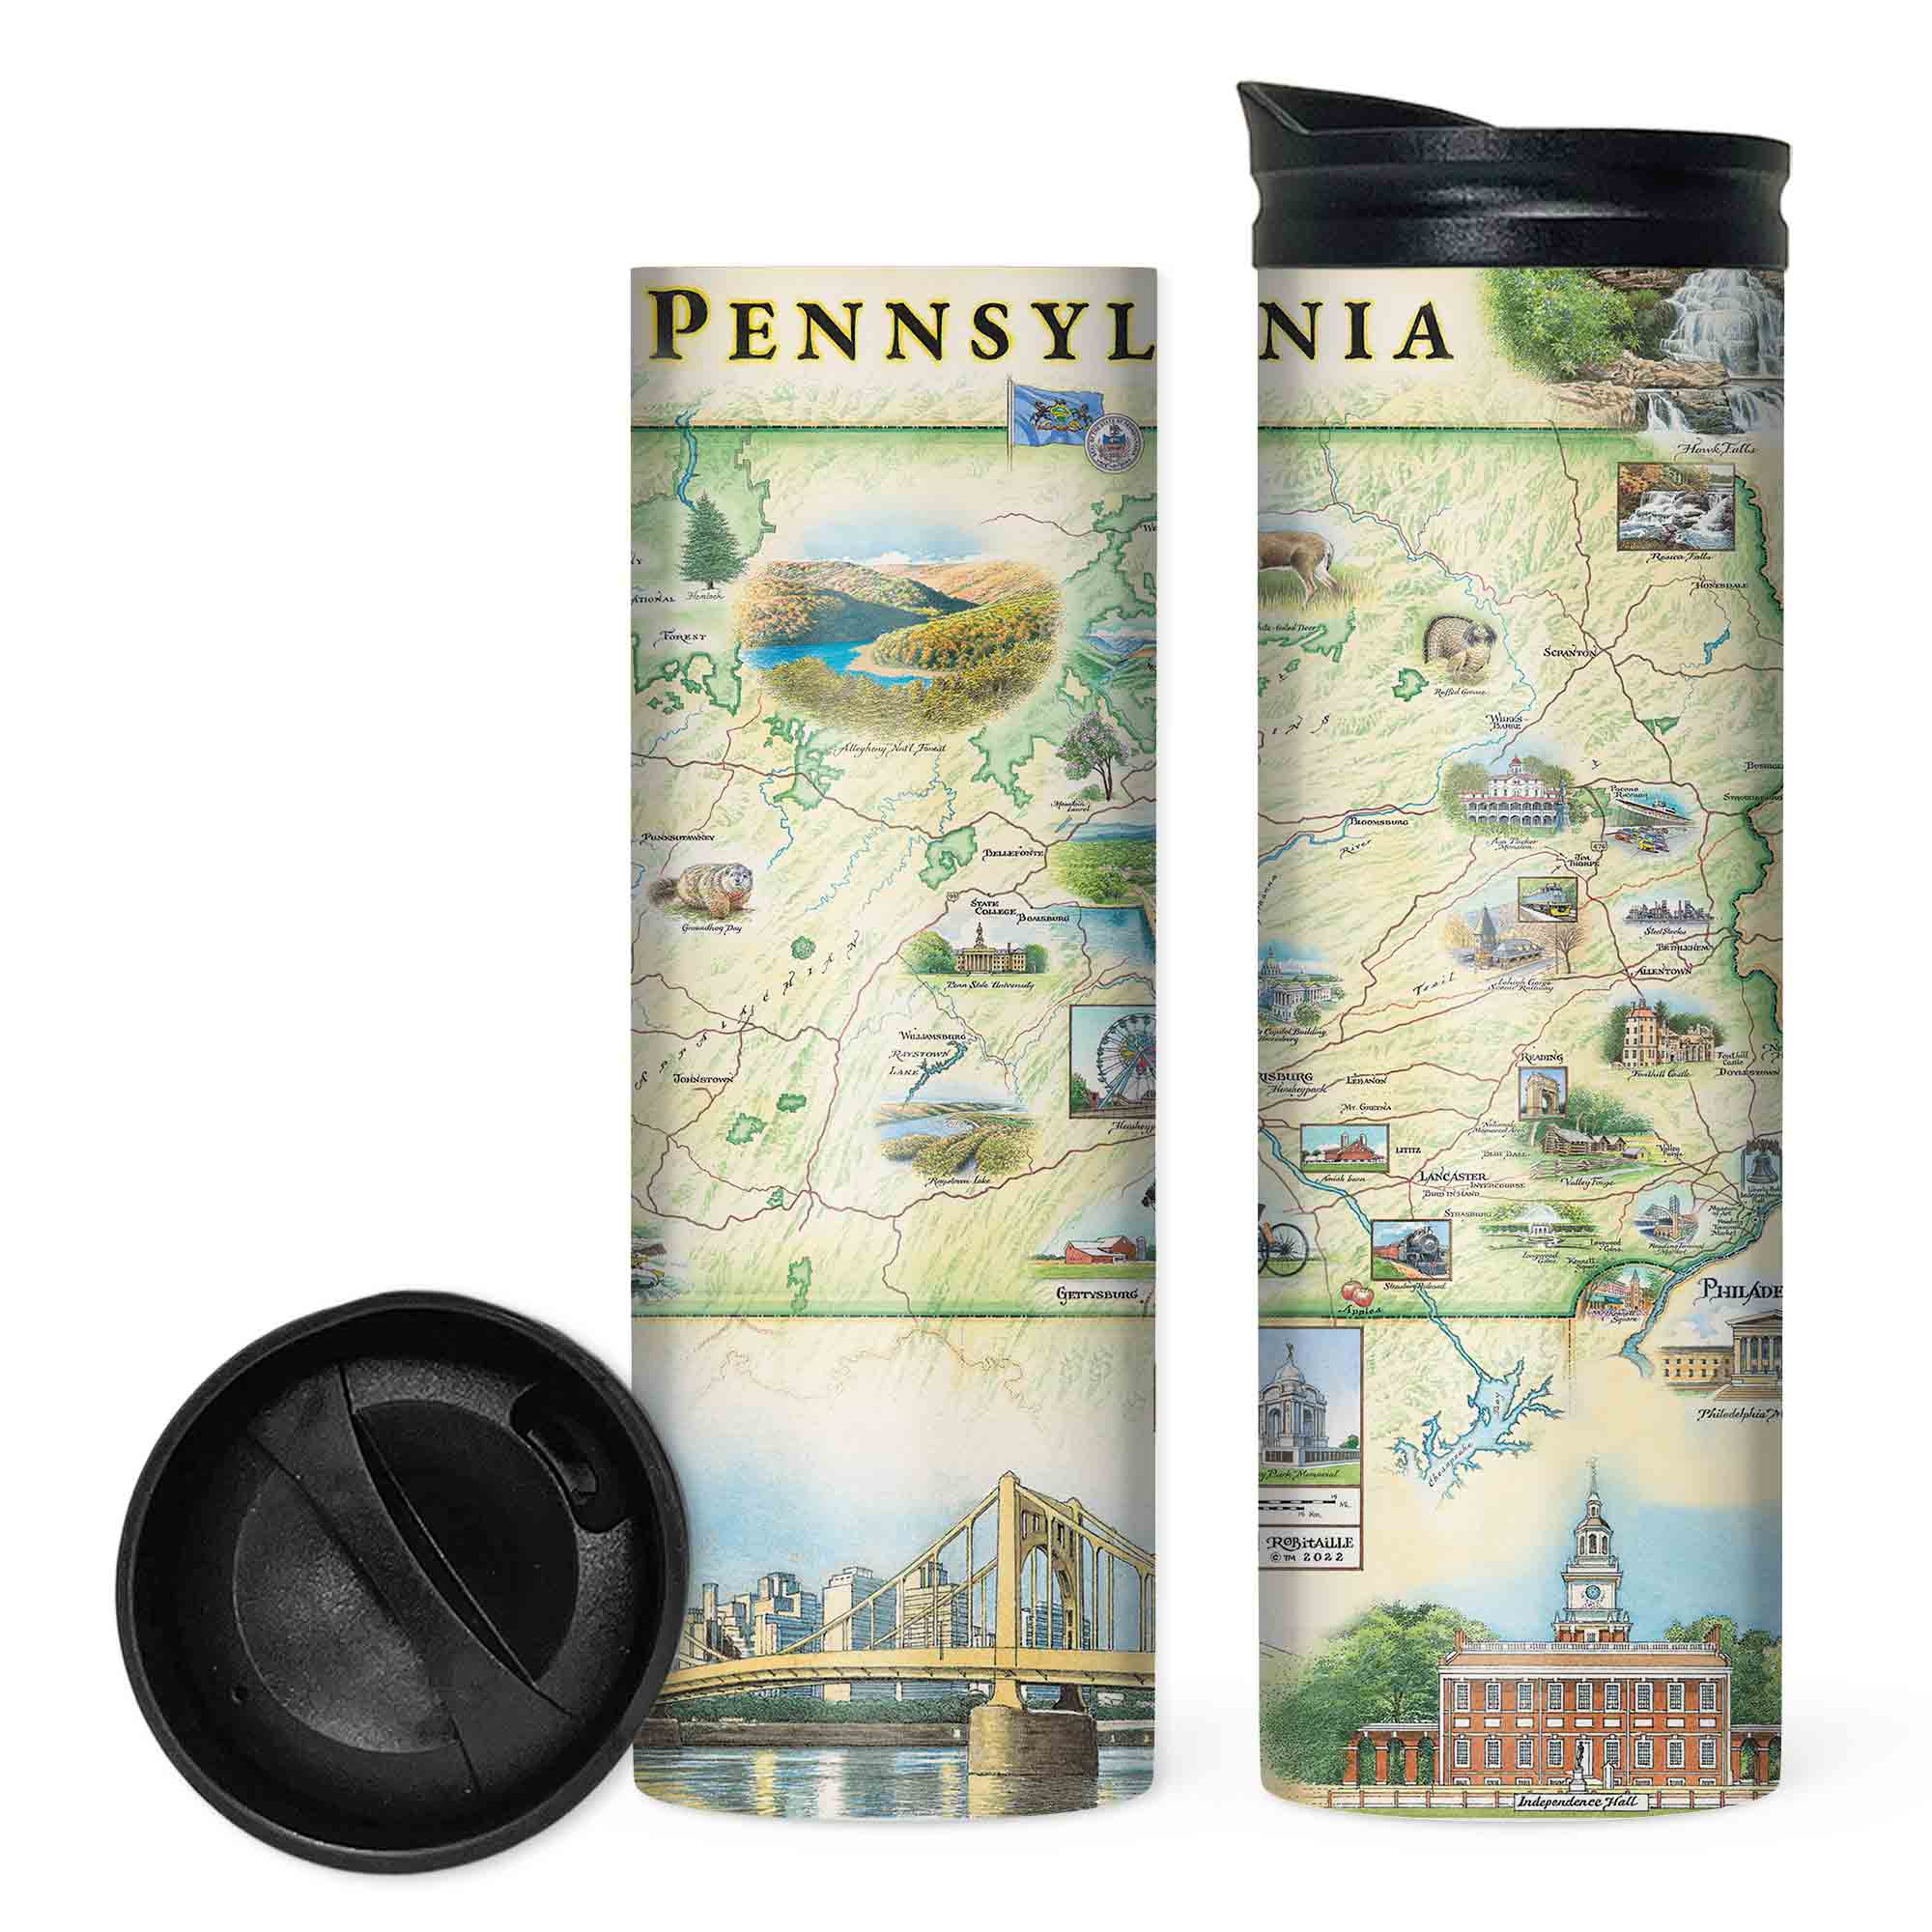 Pennsylvania State Map 16 oz Travel Bottle front and back in neutral colors and green. Featuring Hershey Park, Lancaster, Lake Erie, Amish, Gettysburg Philadelphia, and Pittsburg.